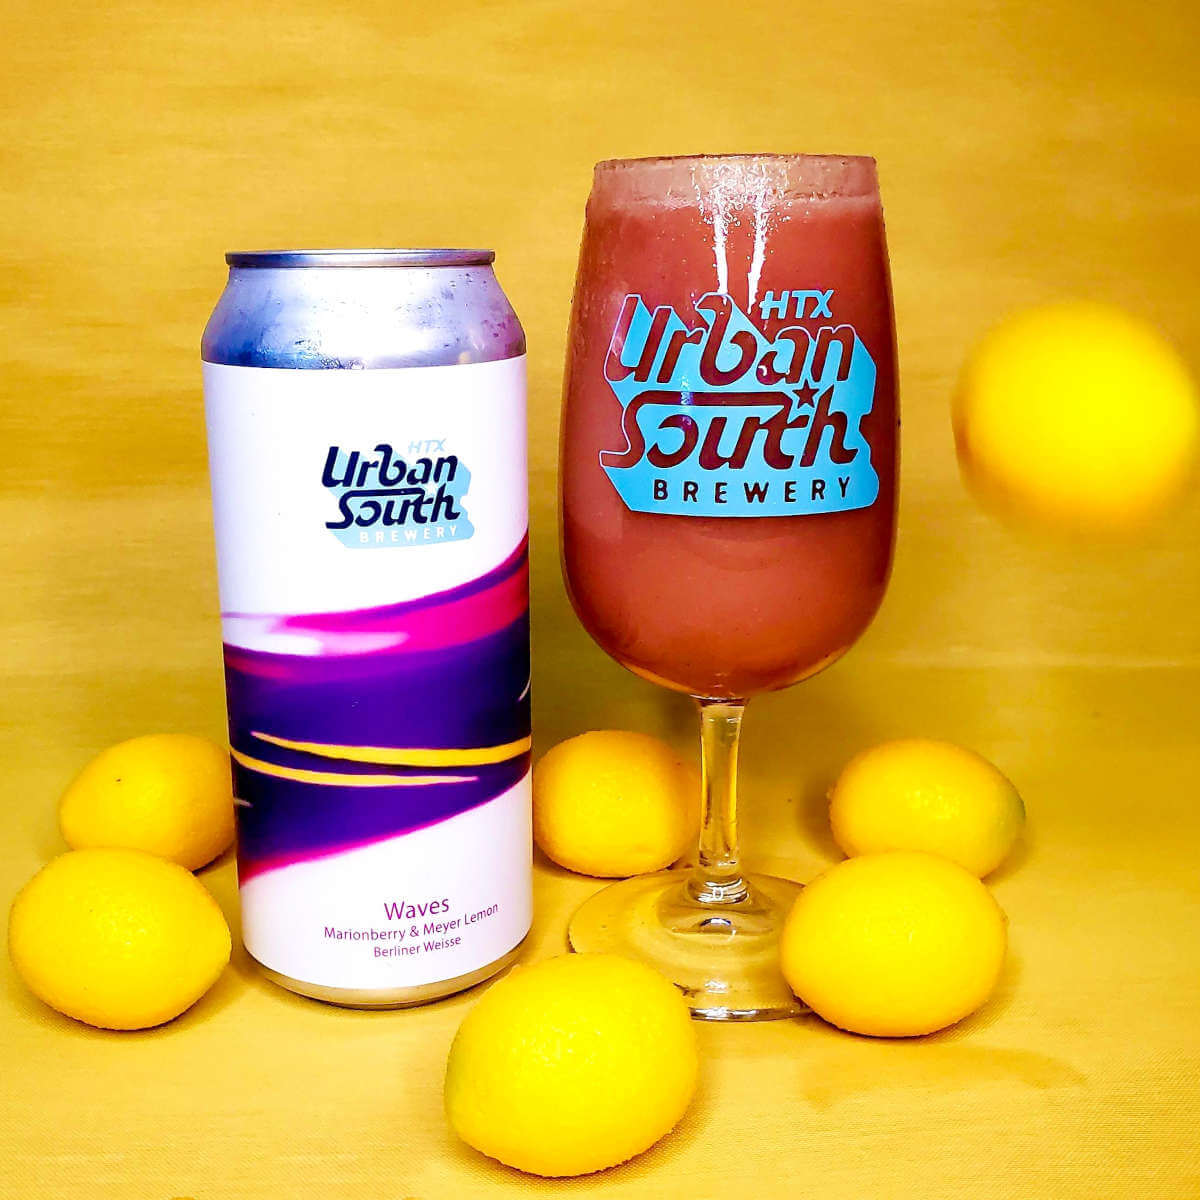 Urban South Brewery Houston wins medal at 2022 U.S. Open beer competition